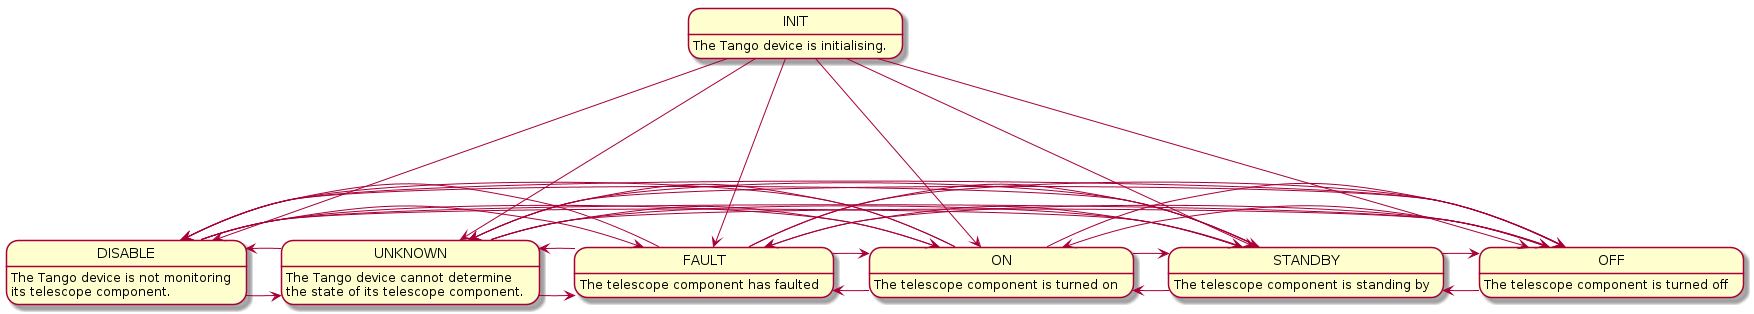 INIT: The Tango device is initialising.
UNKNOWN: The Tango device cannot determine\nthe state of its telescope component.
DISABLE: The Tango device is not monitoring\nits telescope component.
OFF: The telescope component is turned off
STANDBY: The telescope component is standing by
ON: The telescope component is turned on
FAULT: The telescope component has faulted

INIT --down--> DISABLE
INIT --down--> UNKNOWN
INIT --down--> OFF
INIT --down--> STANDBY
INIT --down--> ON
INIT --down--> FAULT
DISABLE -> UNKNOWN
DISABLE -> OFF
DISABLE -> STANDBY
DISABLE -> ON
DISABLE -> FAULT

UNKNOWN -> DISABLE
UNKNOWN -> OFF
UNKNOWN -> STANDBY
UNKNOWN -> ON
UNKNOWN -> FAULT

OFF -> DISABLE
OFF -> UNKNOWN
OFF -> STANDBY
OFF -> ON
OFF -> FAULT

STANDBY -> DISABLE
STANDBY -> UNKNOWN
STANDBY -> OFF
STANDBY -> ON
STANDBY -> FAULT

ON -> DISABLE
ON -> UNKNOWN
ON -> OFF
ON -> STANDBY
ON -> FAULT

FAULT -> DISABLE
FAULT -> UNKNOWN
FAULT -> OFF
FAULT -> STANDBY
FAULT -> ON
